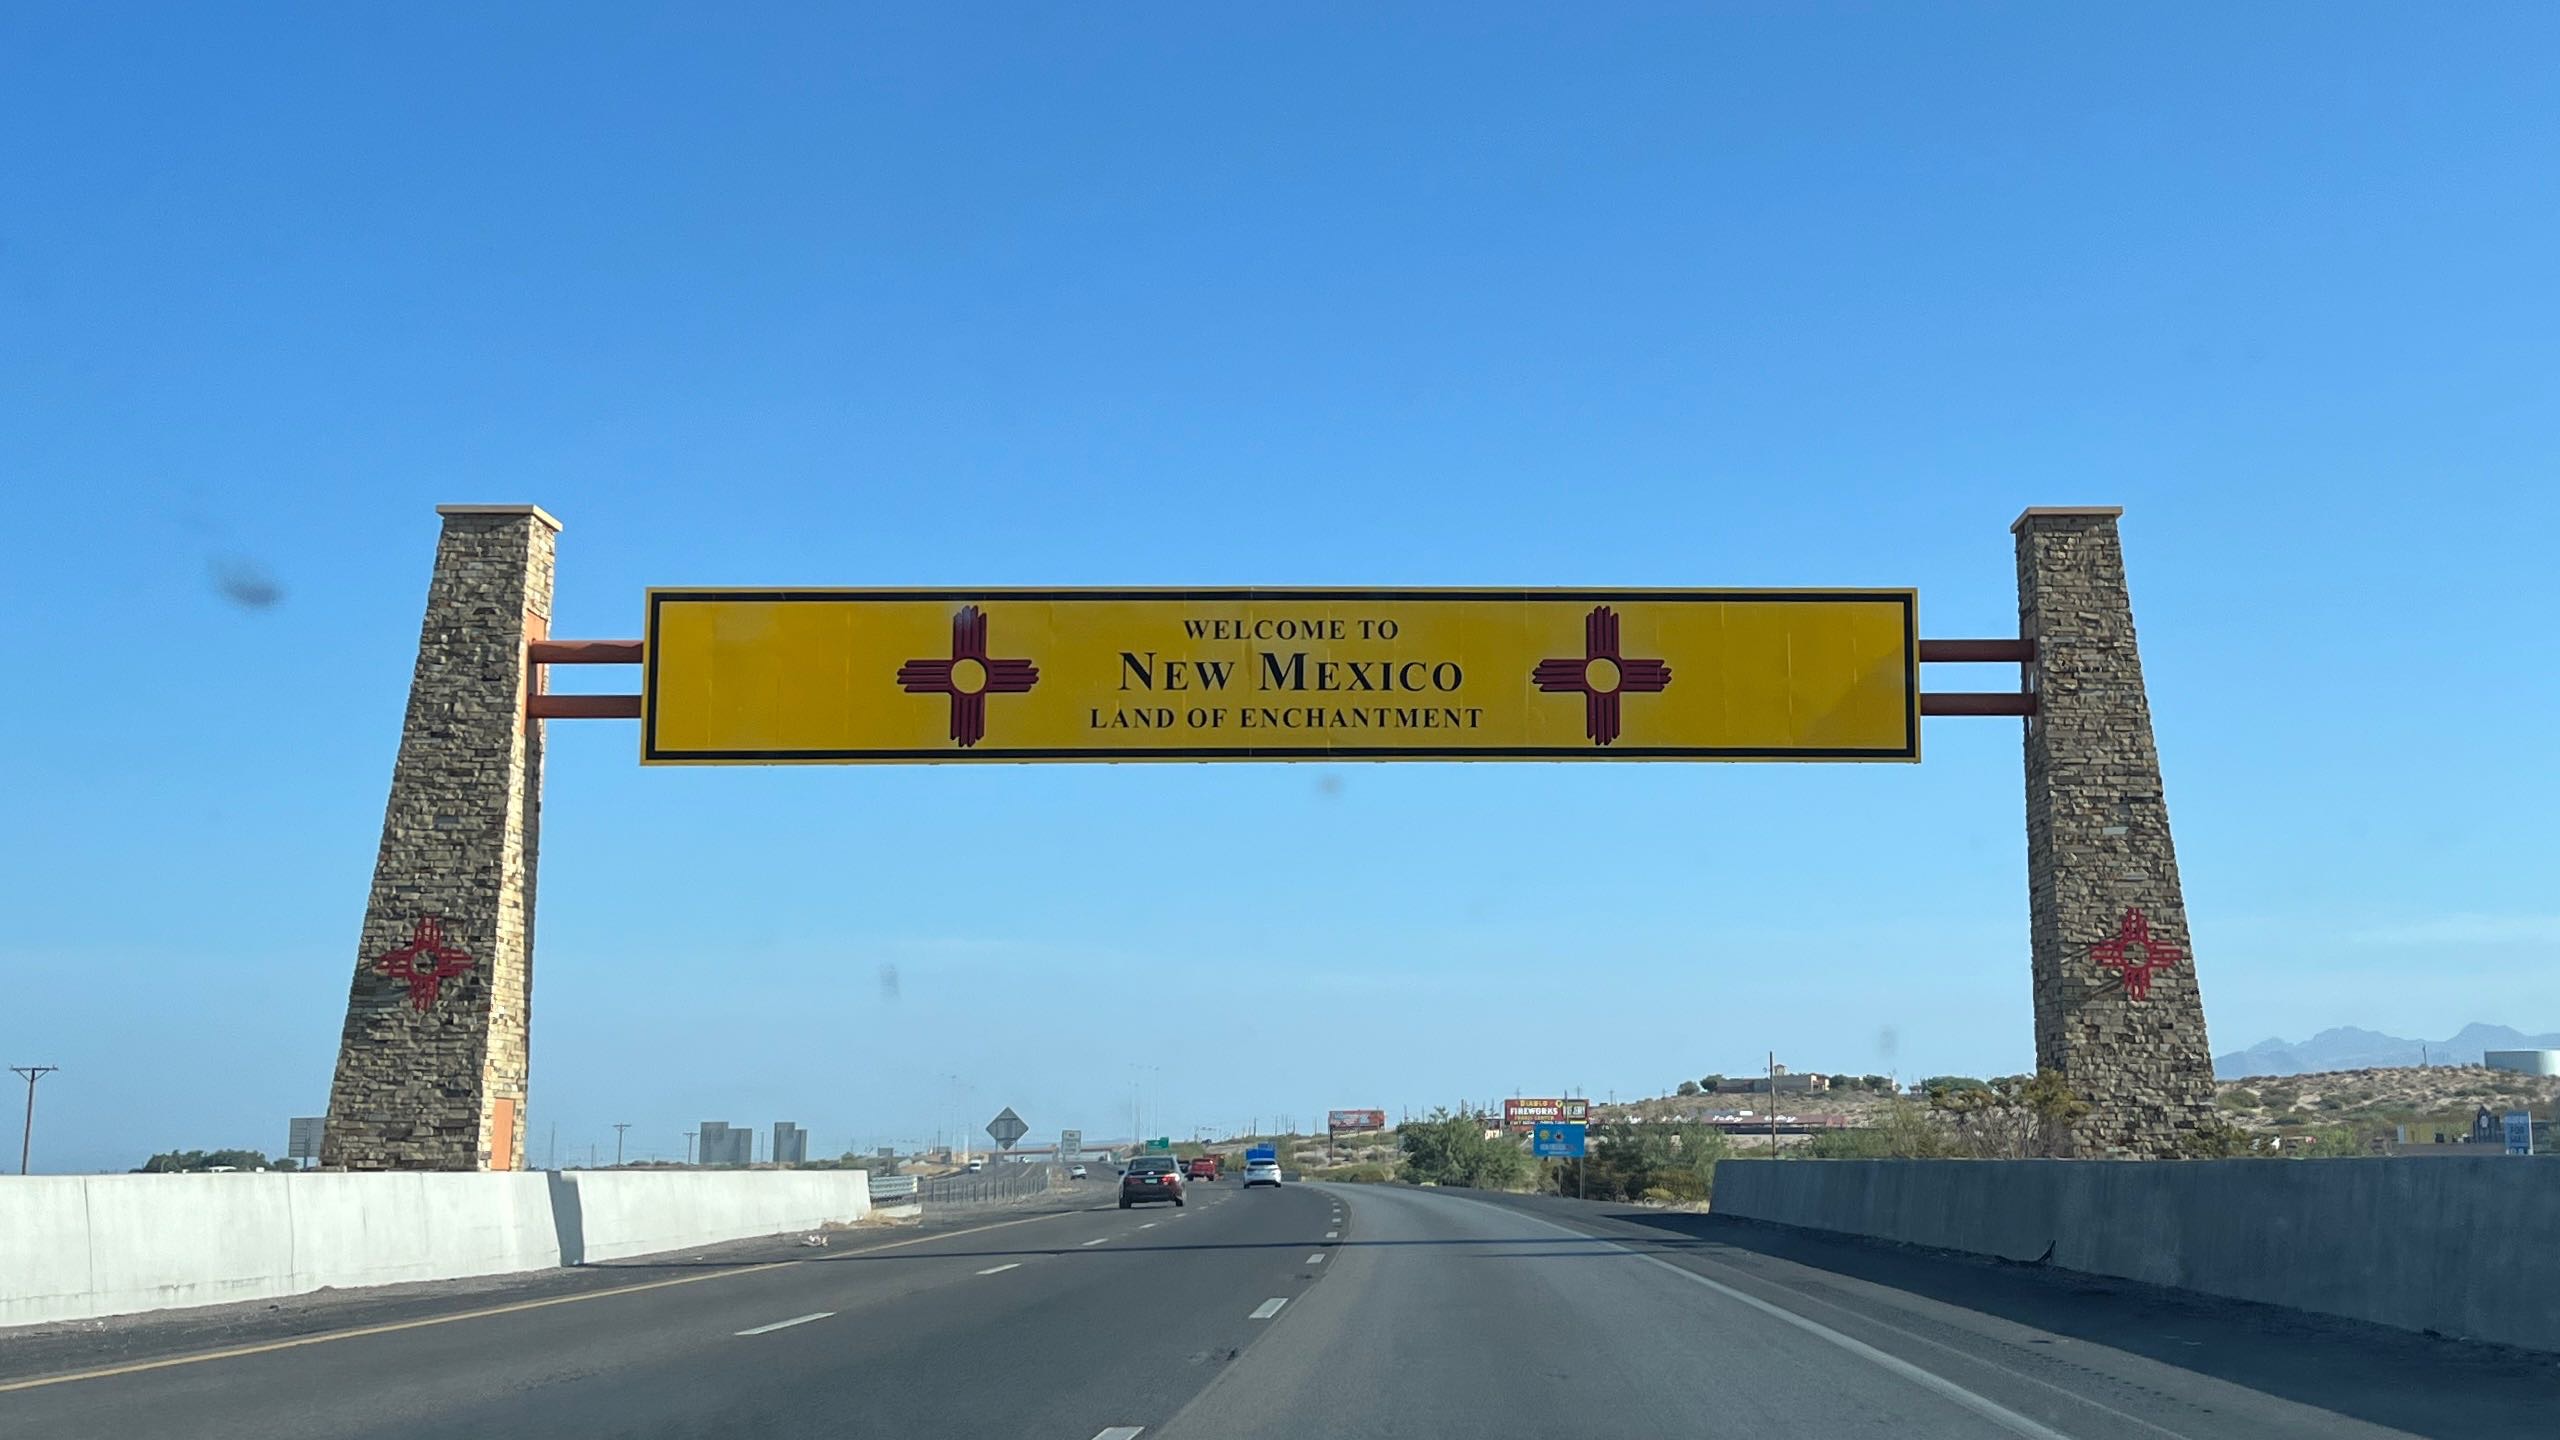 Photo of the Welcome to New Mexico sign on the highway